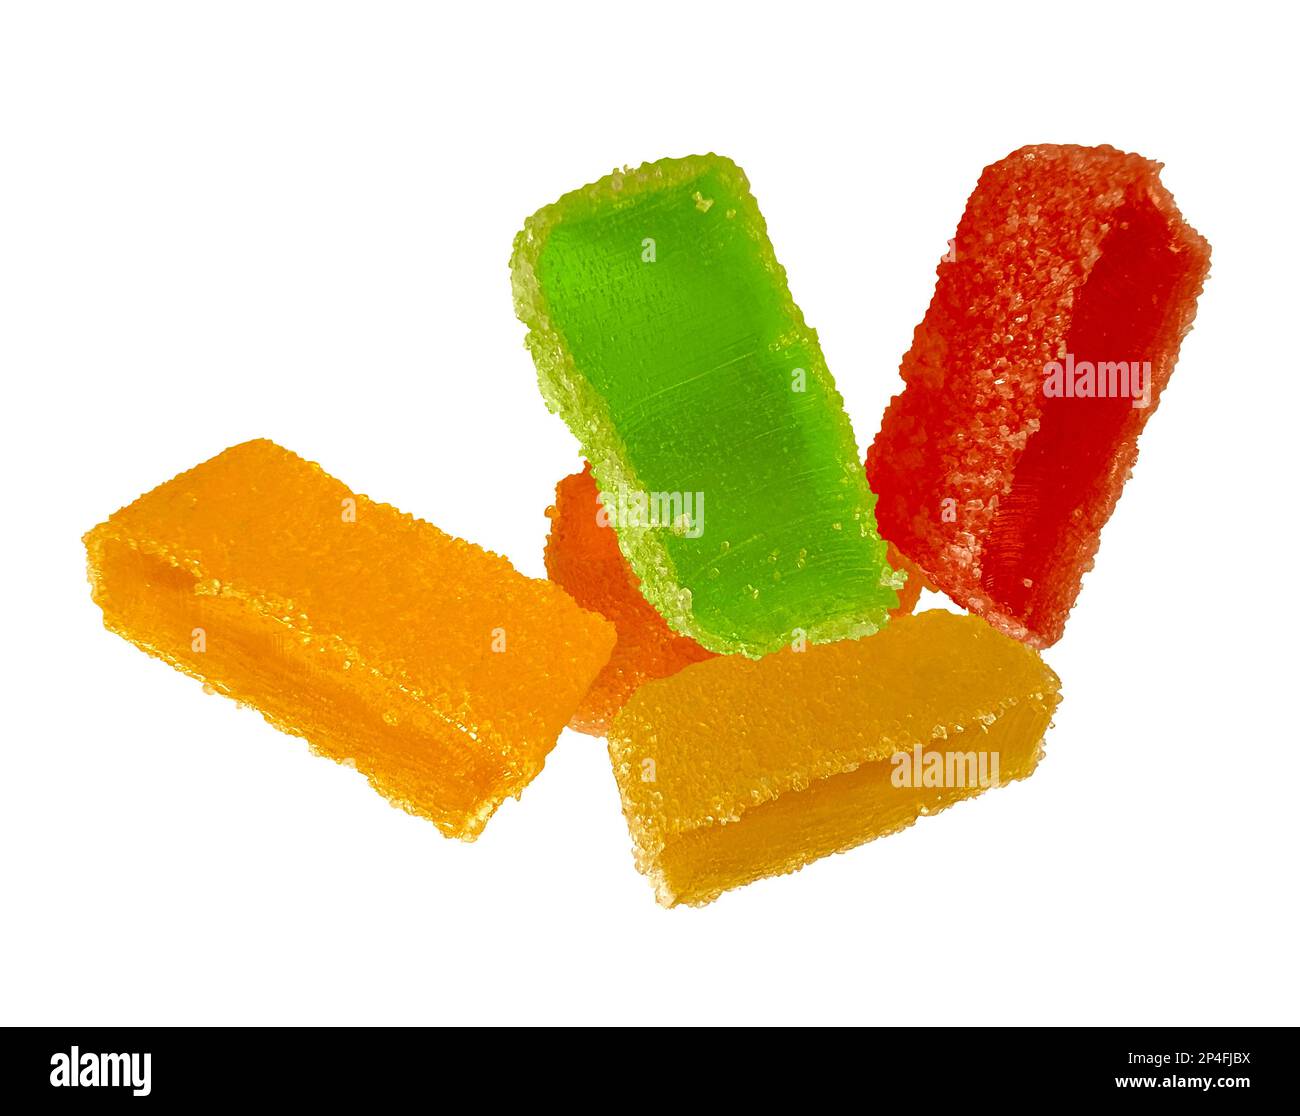 Colorful fruit jellies. Yellow, red and green jelly candies isolated on ...